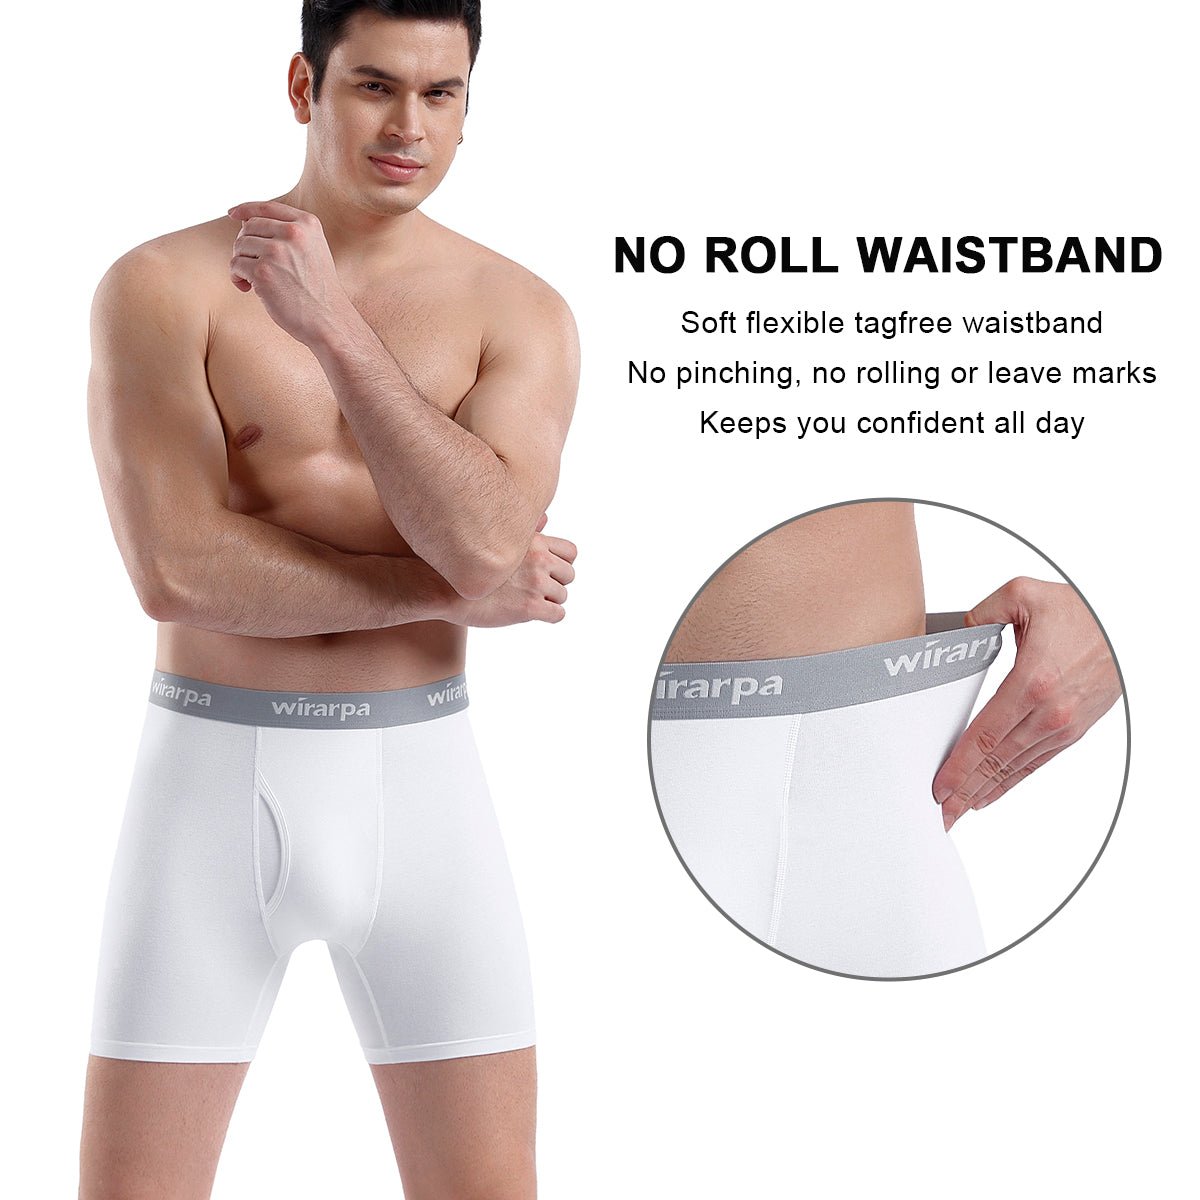 wirarpa Men’s No Fly Covered Waistband 100 Cotton Briefs 4 Pack